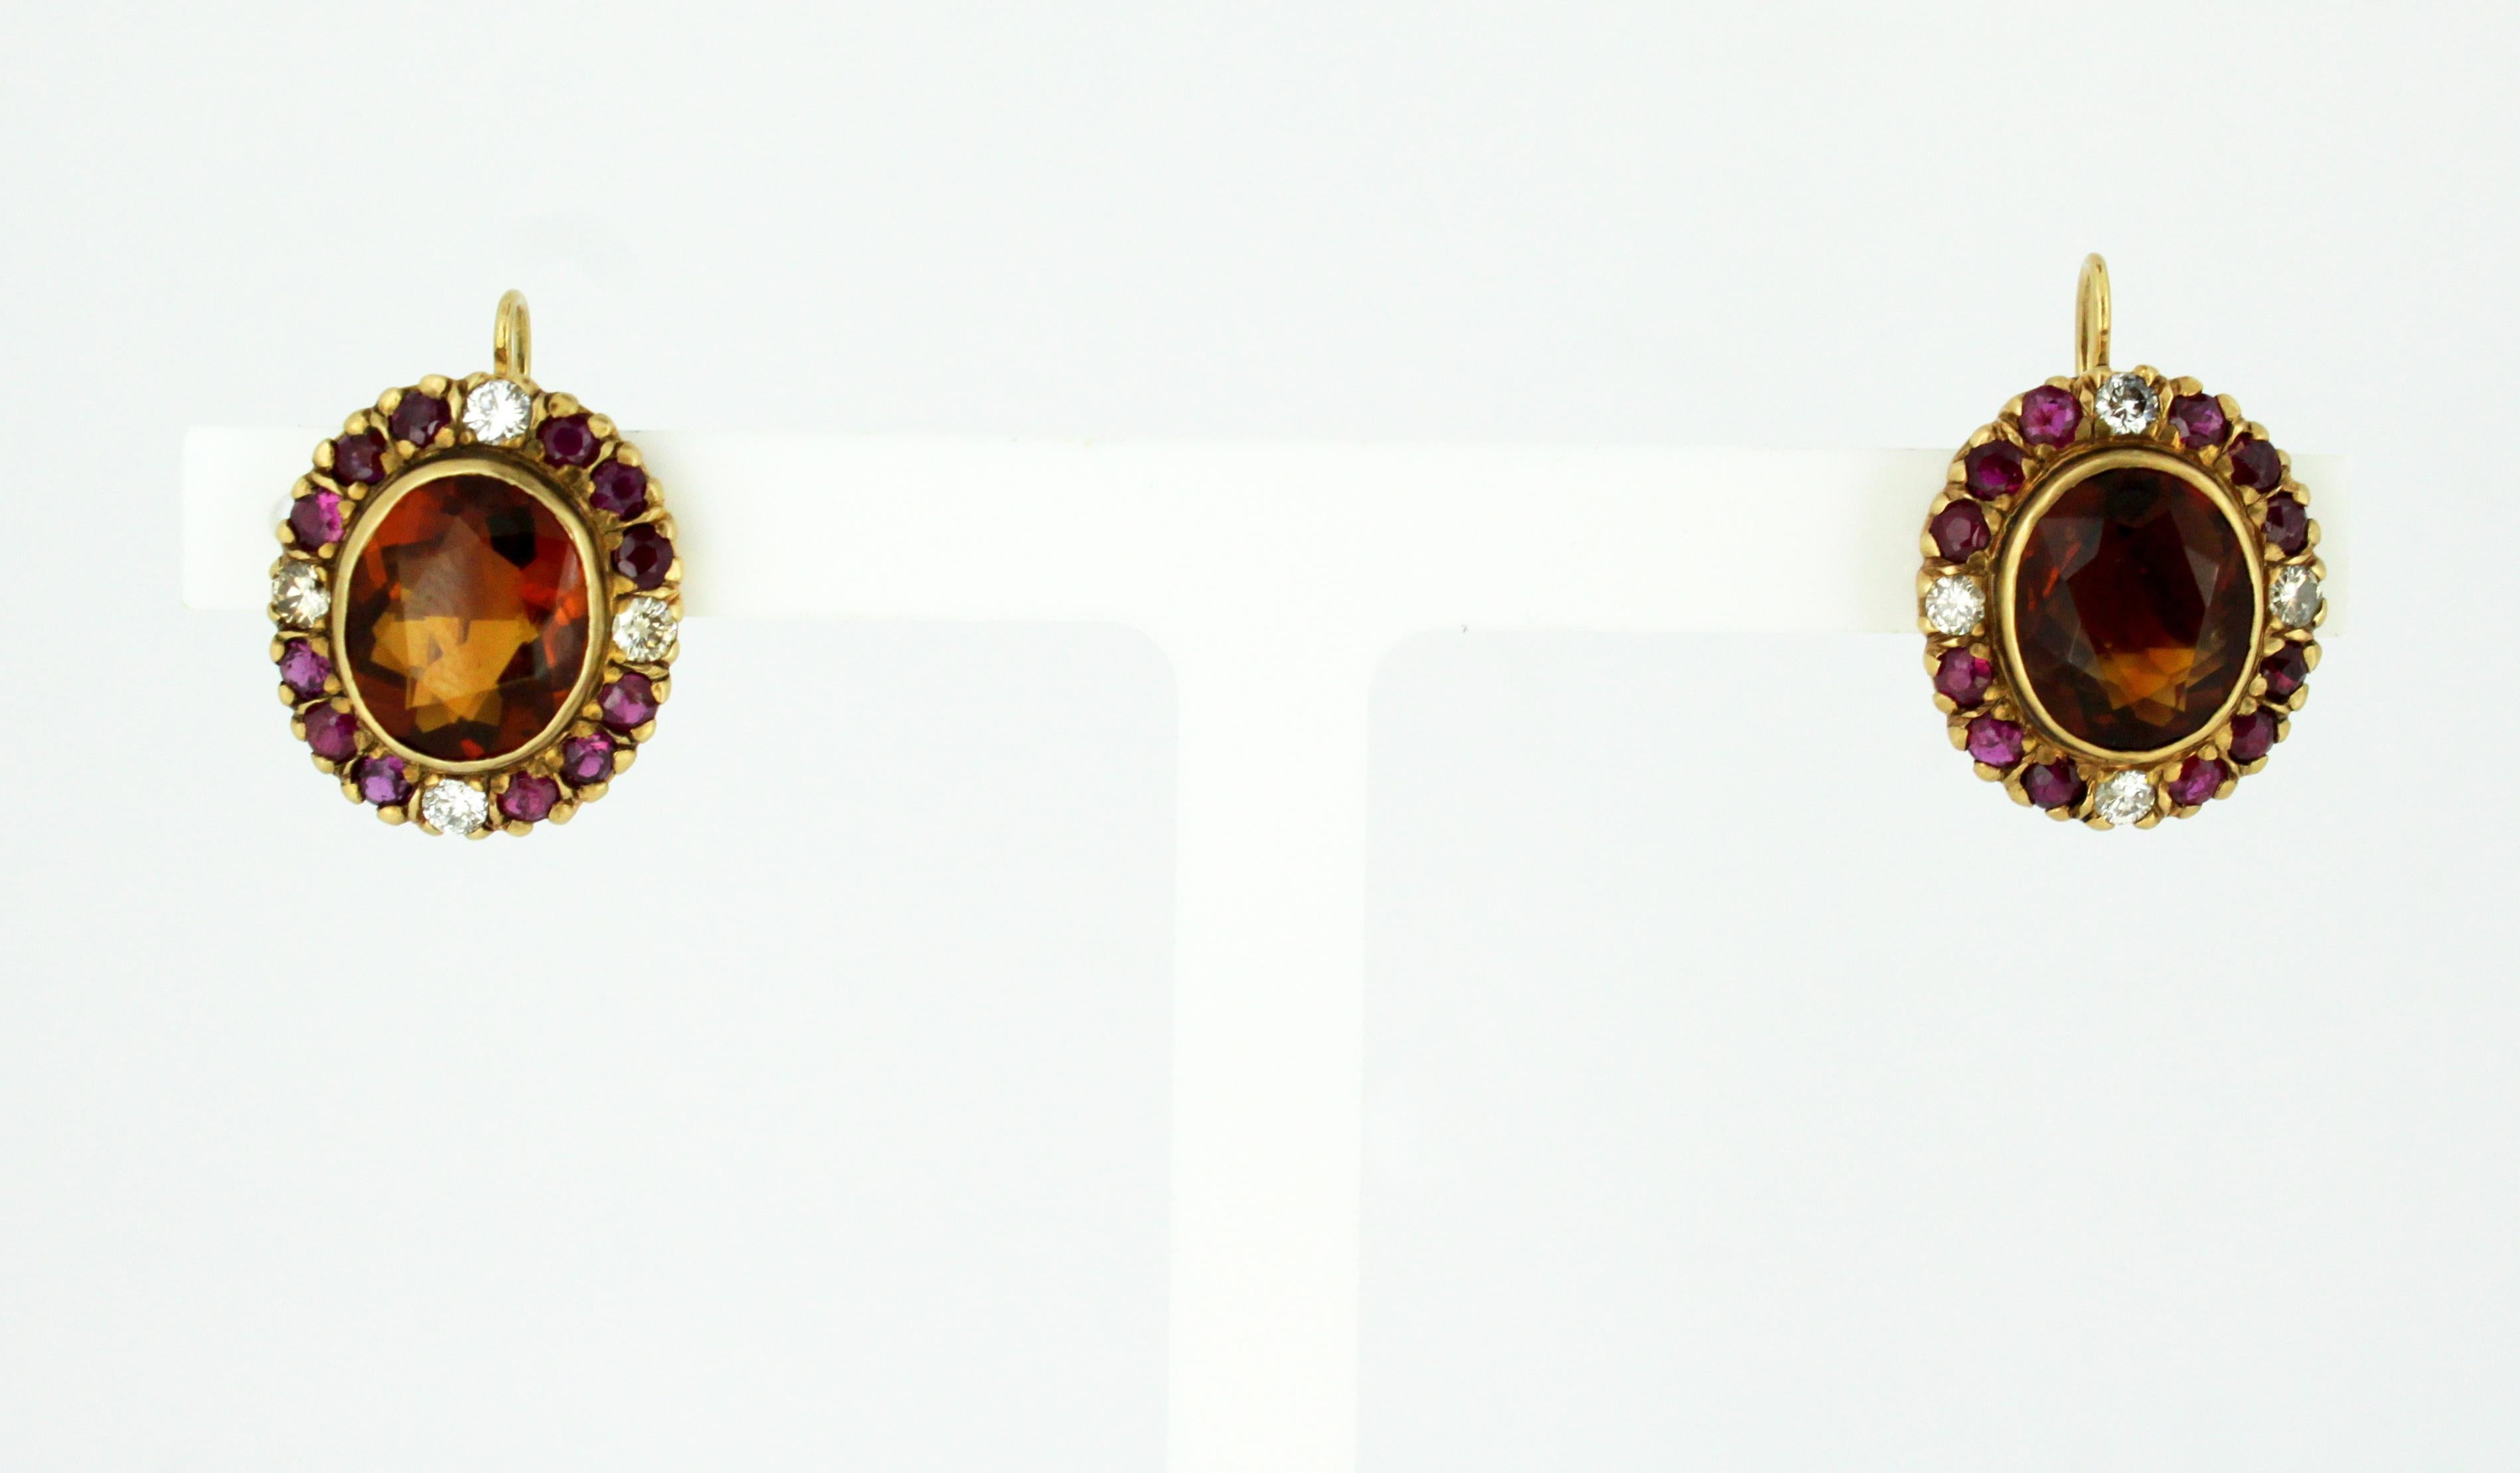 18kt yellow gold ladies clip-on earrings with garnets, diamonds and rubies.
Circa 1970s
Tested positive for 18kt gold.

Approx Dimensions - 
Size : 2.4 x 1.6 x 1.3 cm
Weight : 8 grams total

Diamonds - 
Cut : Round
Number of diamonds : 8